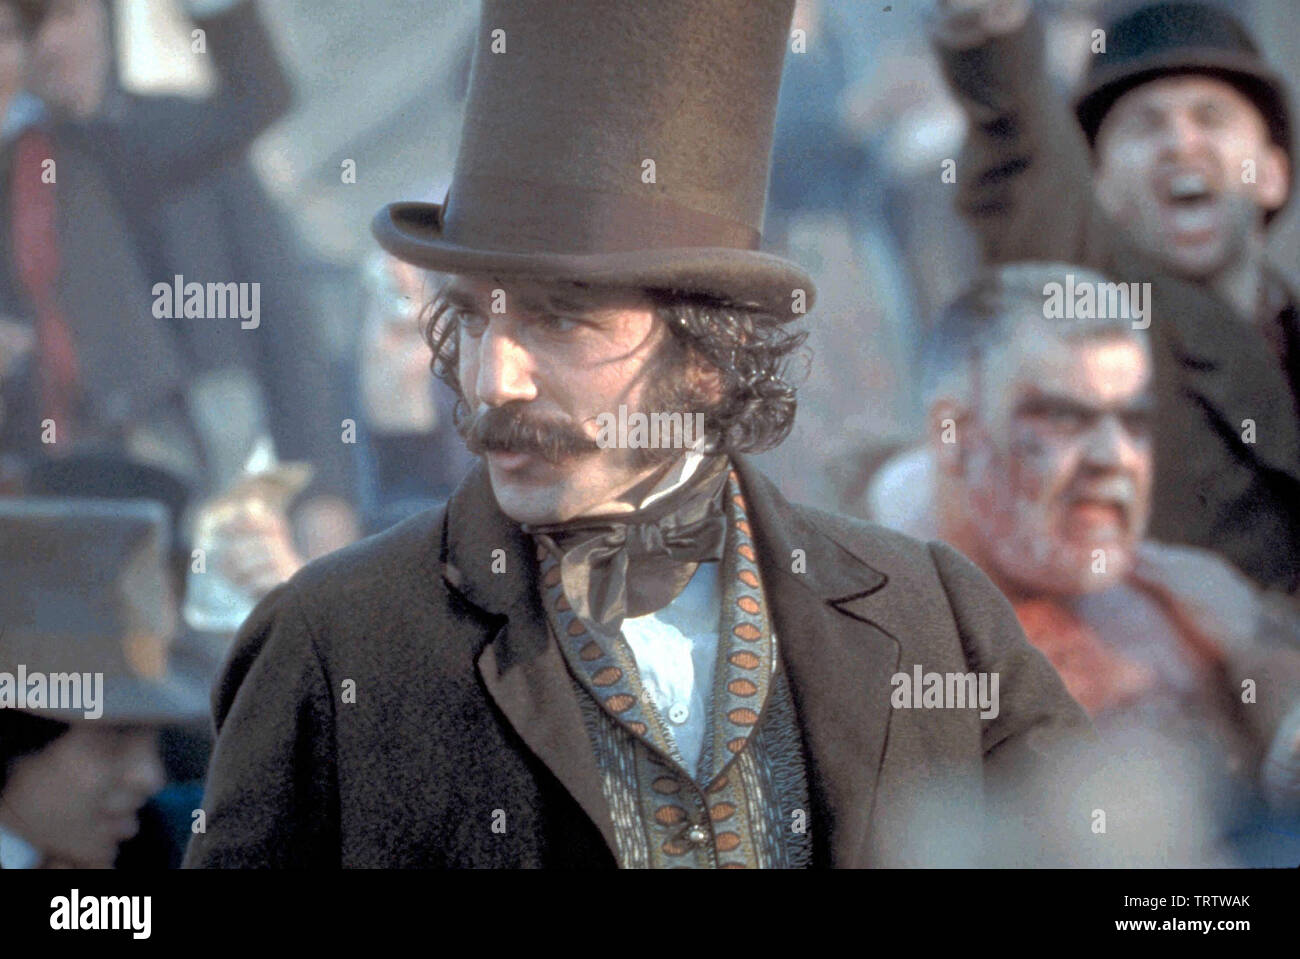 DANIEL DAY-LEWIS in GANGS OF NEW YORK (2002). Copyright: Editorial use only. No merchandising or book covers. This is a publicly distributed handout. Access rights only, no license of copyright provided. Only to be reproduced in conjunction with promotion of this film. Credit: MIRAMAX / Album Stock Photo